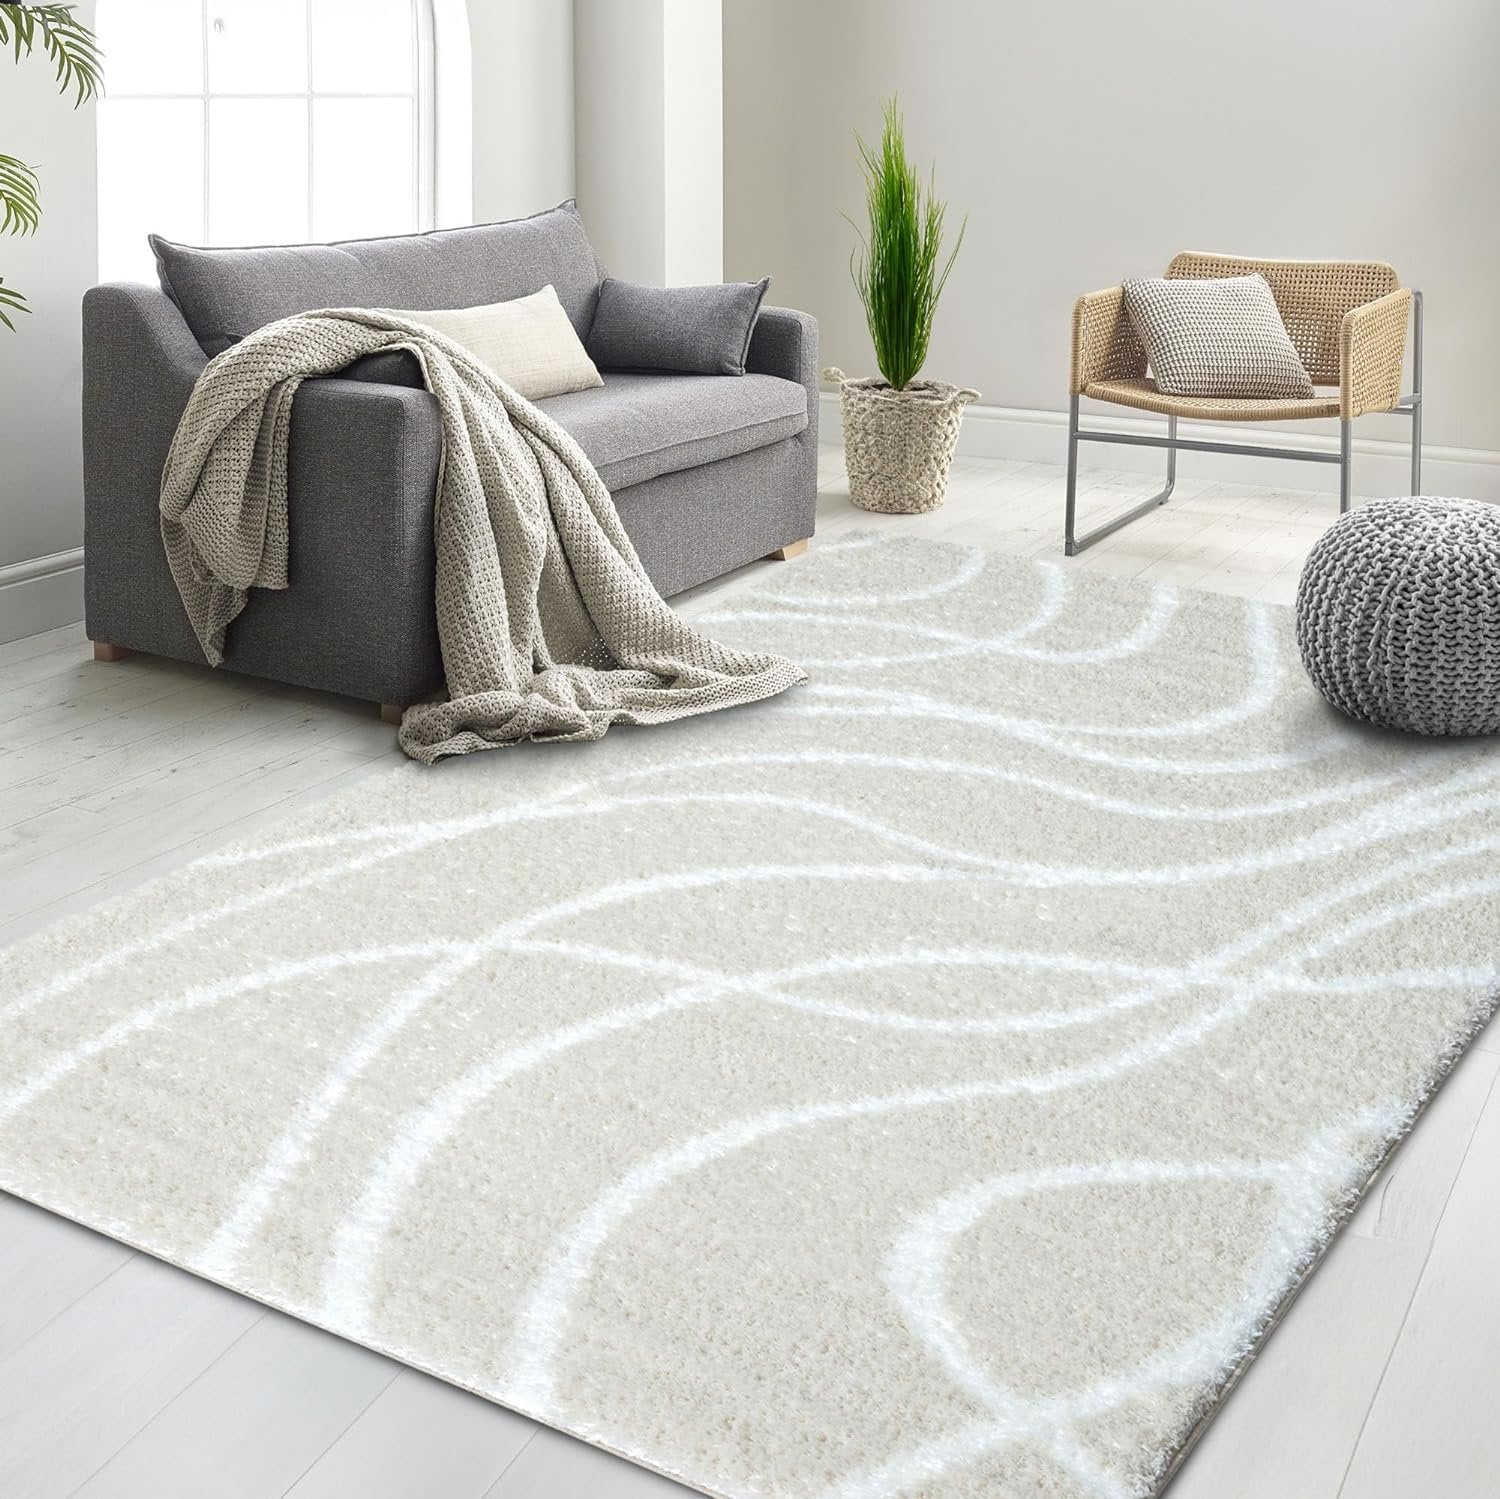 HR Plush Wave-Patterned Shag Rug, 1-Inch Thick Soft High Pile, Stain-Resistant Carpet for Living Room #26223